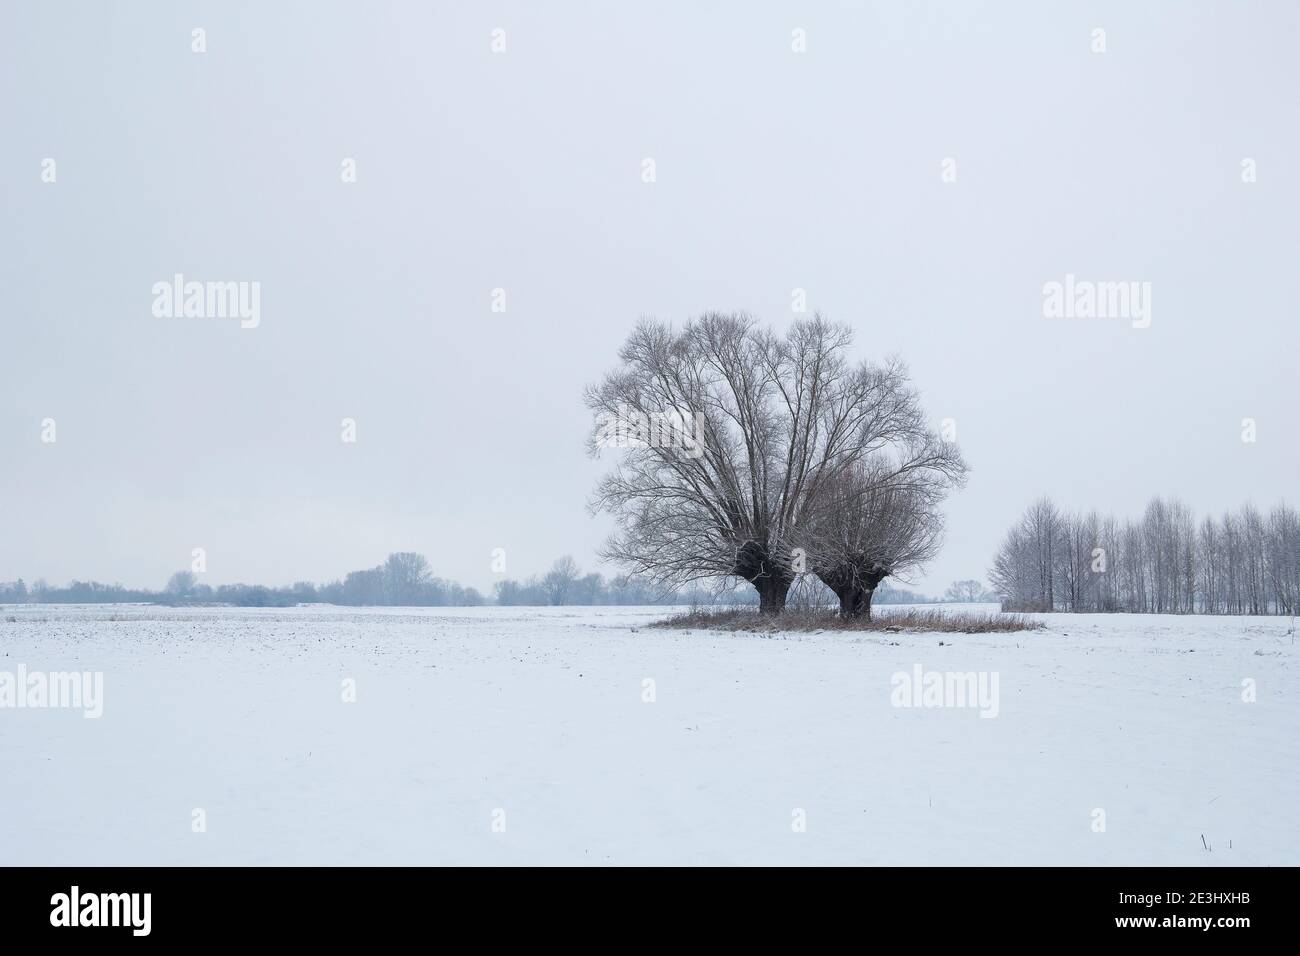 Two willow trees in rural polish landscape with white fields Stock Photo